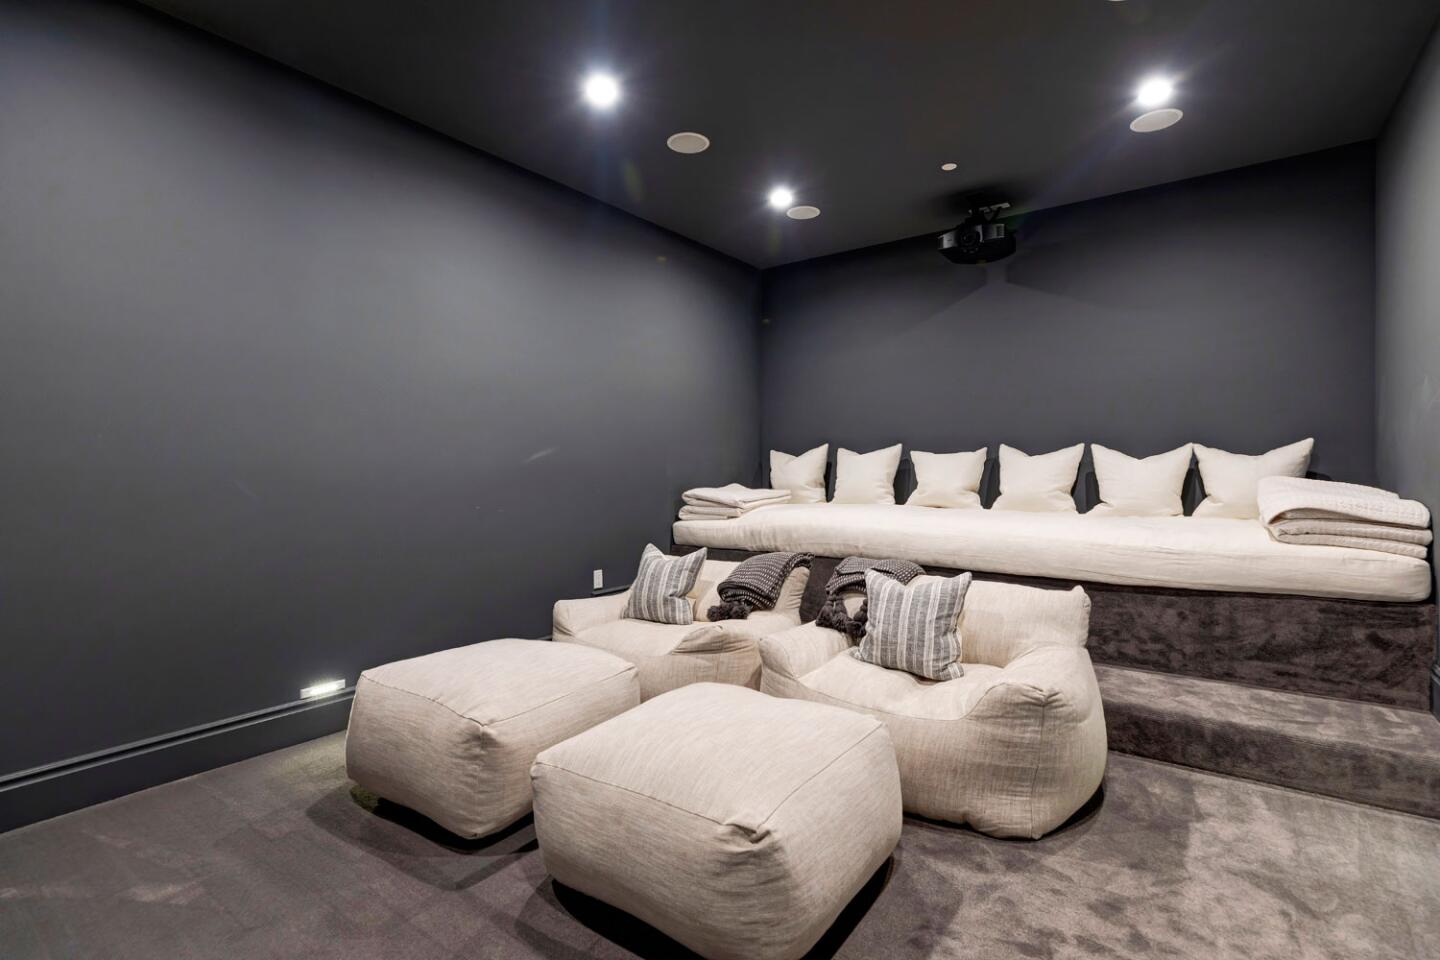 The home theater features tiered seating.